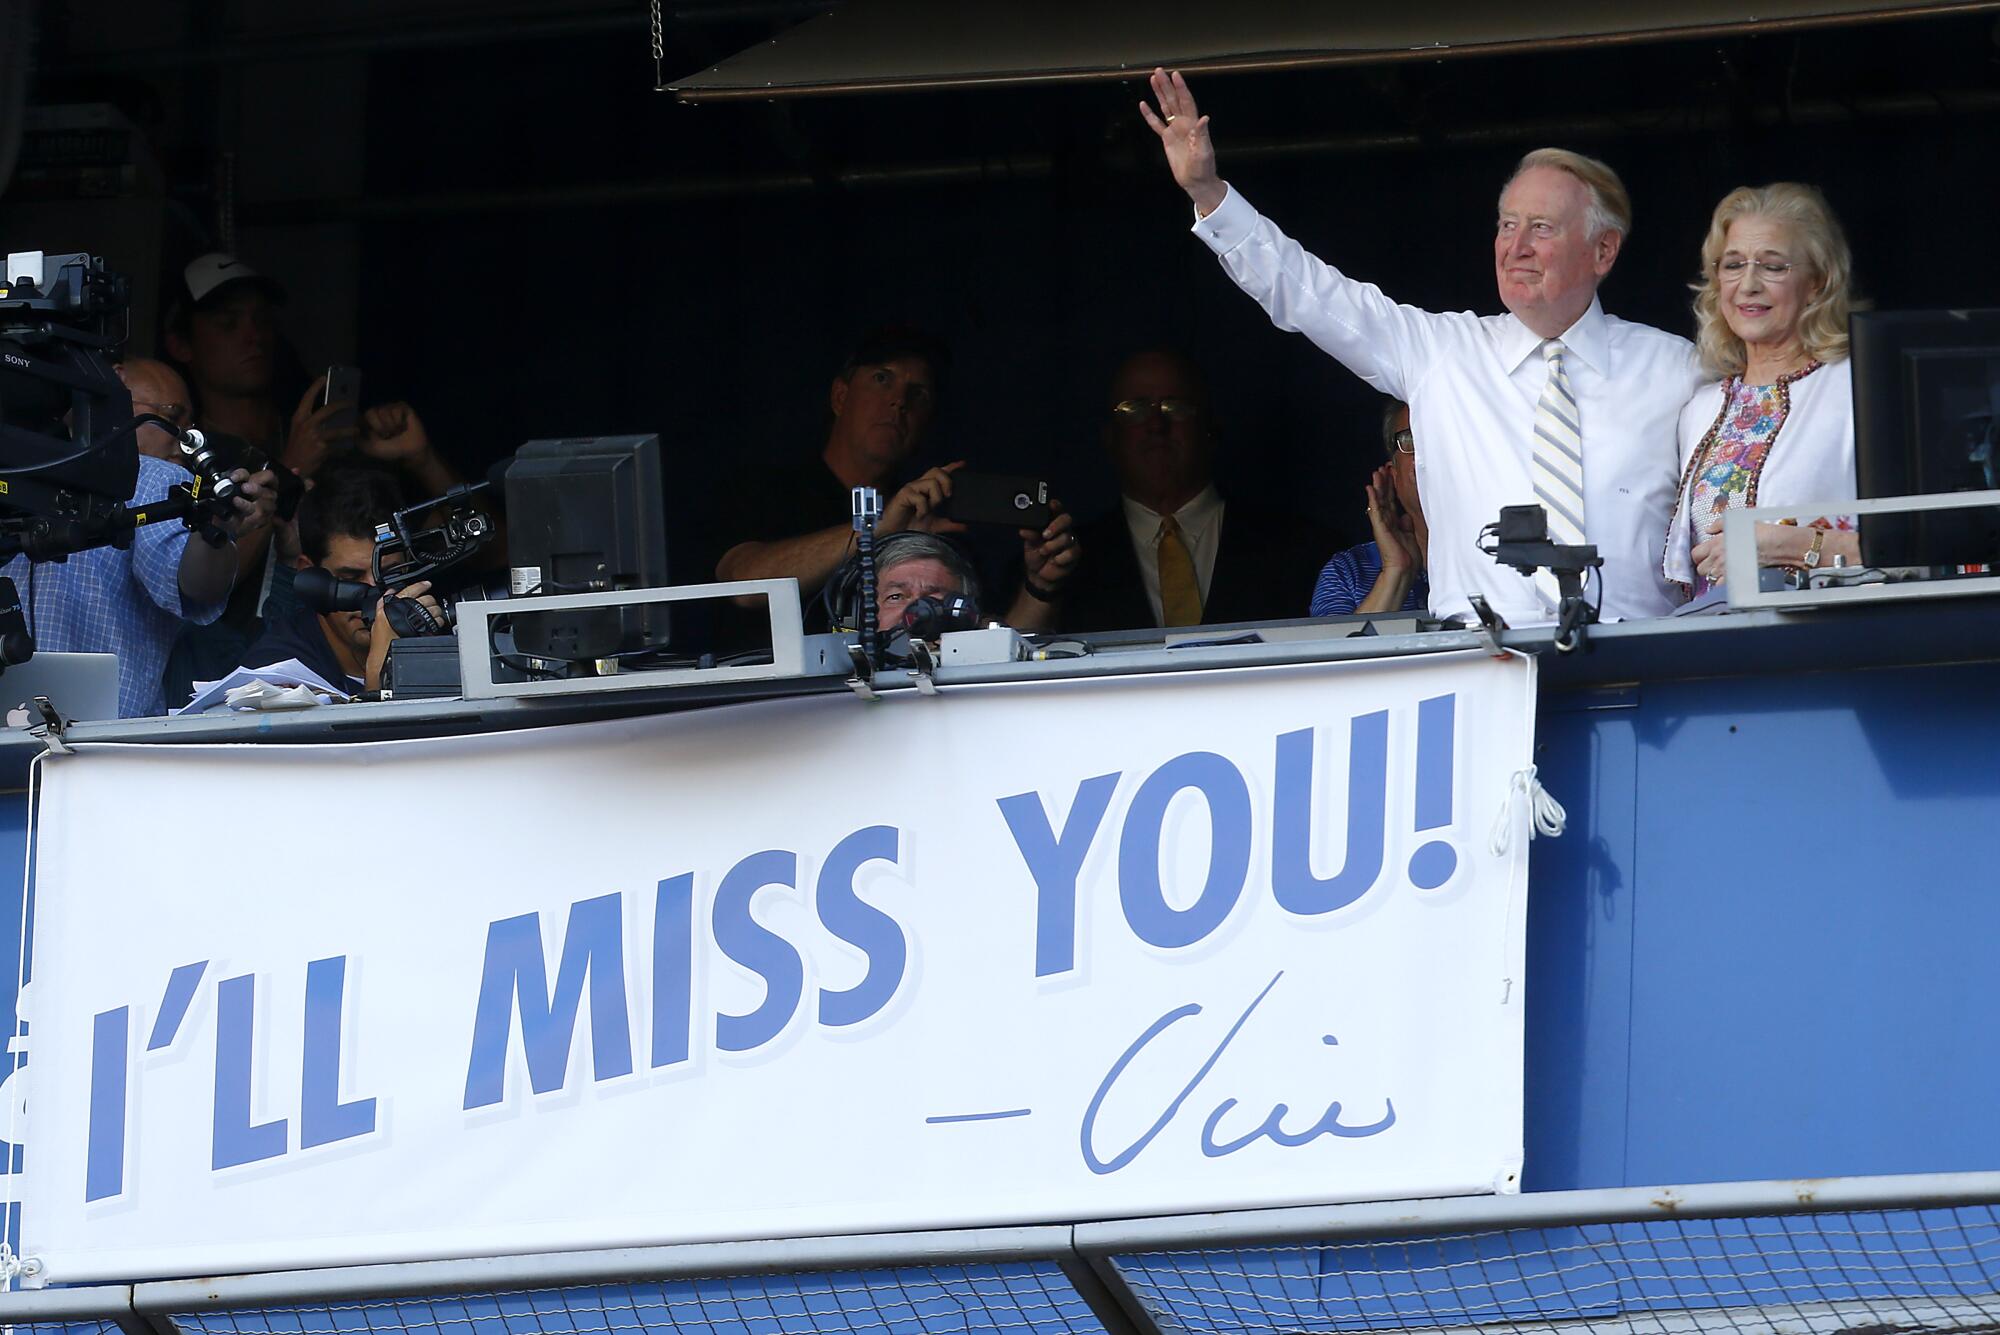 Dodgers announcer Vin Scully, with wife Sandra Hunt, waves to the fans on his last day in the Dodgers broadcast booth.